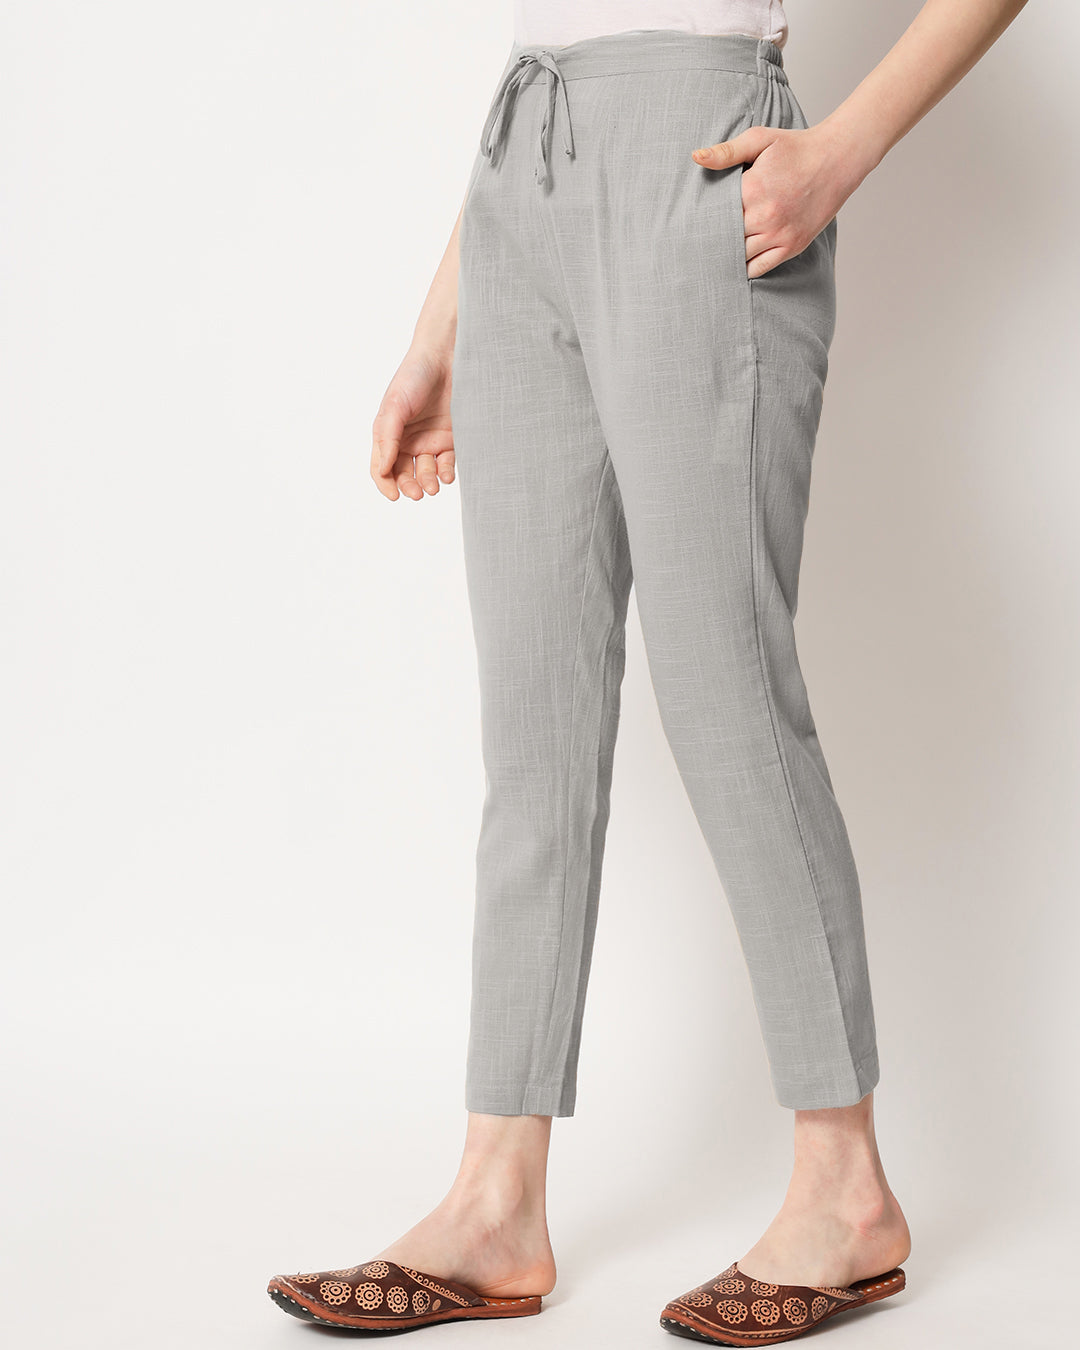 Iced Grey Cigarette Pants